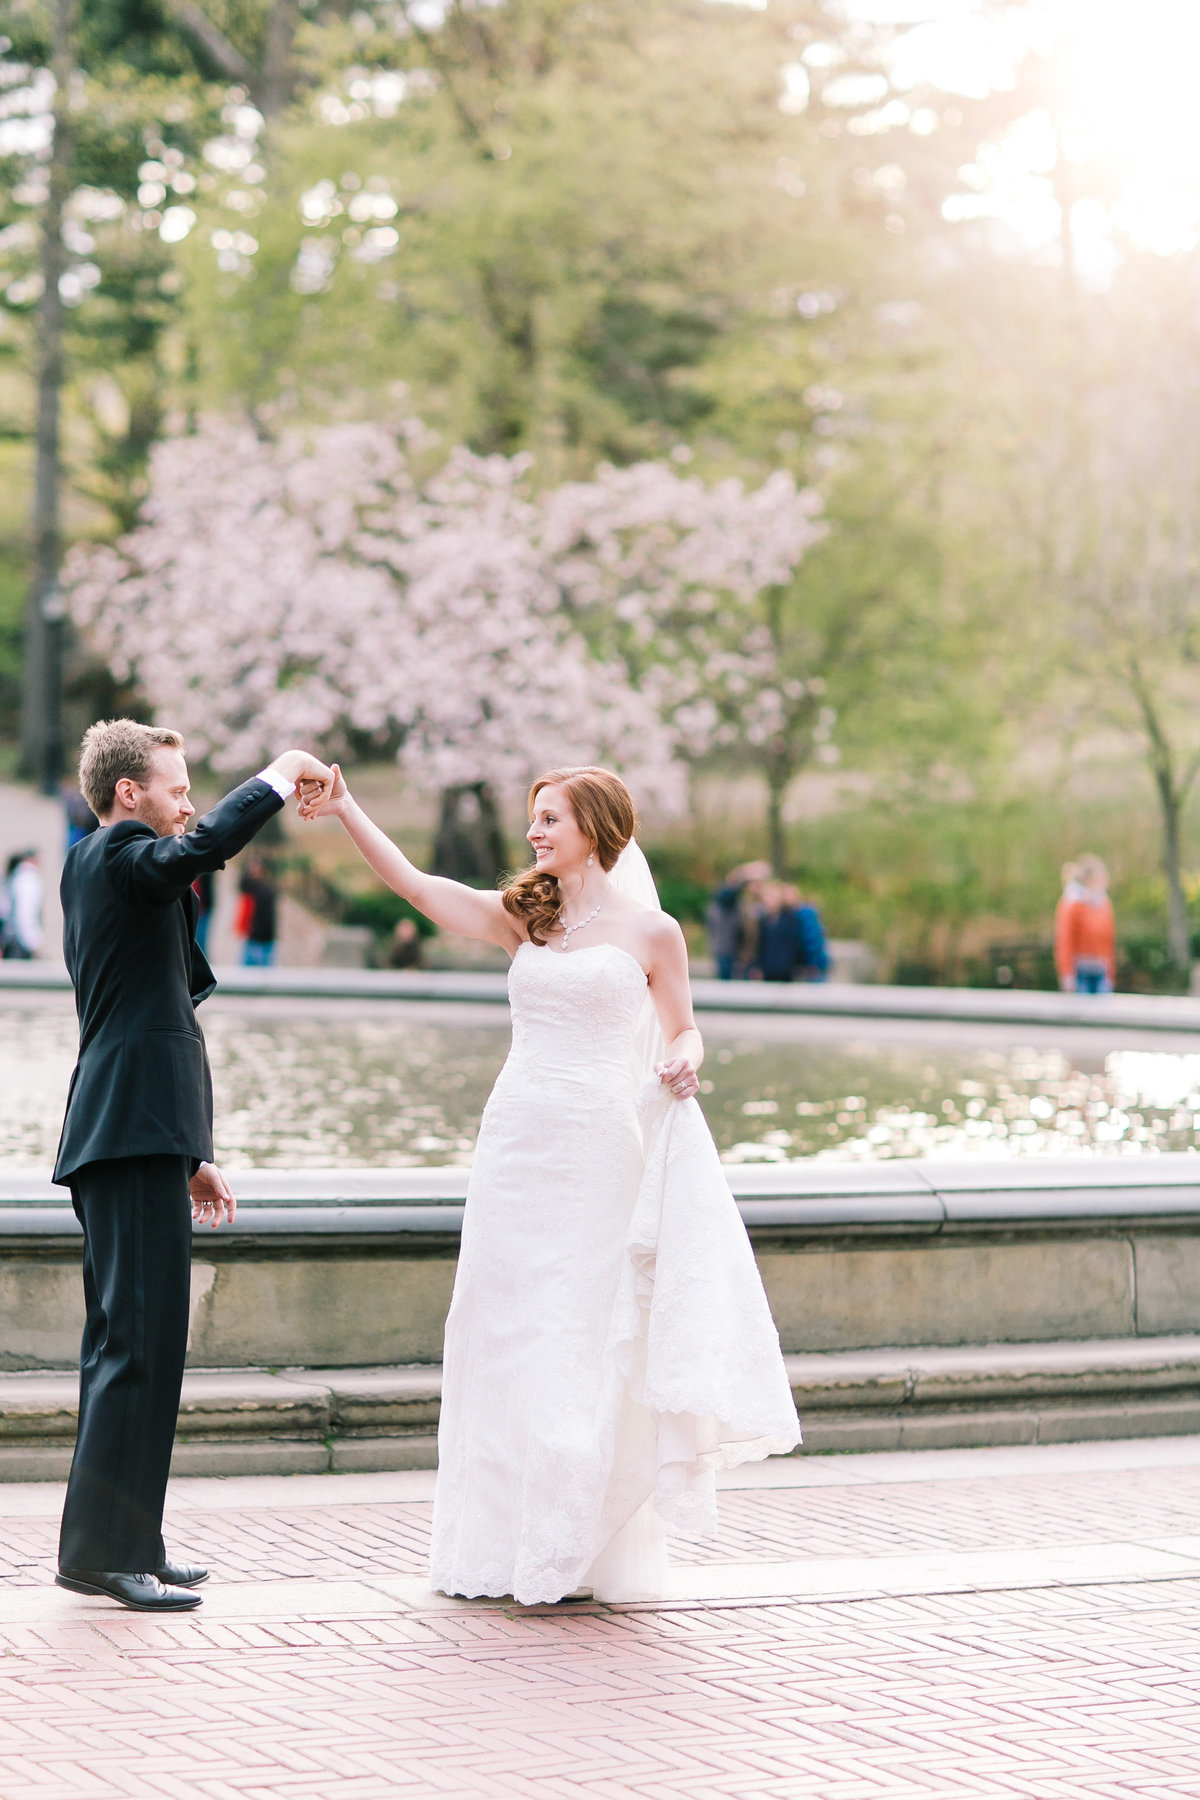 Groom twirling his bride at sunset in central park